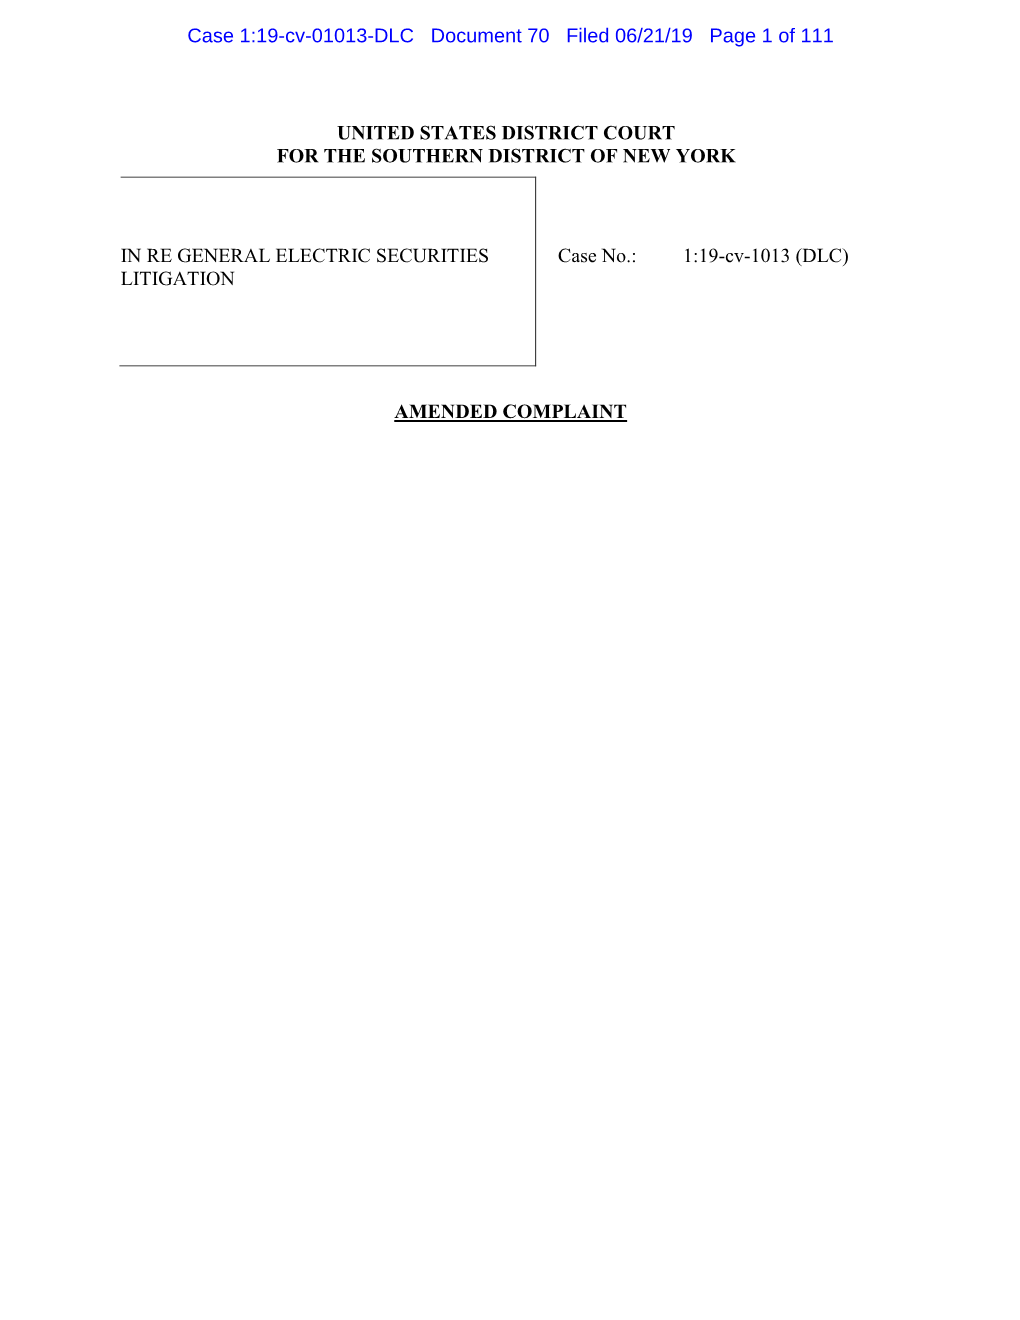 Case 1:19-Cv-01013-DLC Document 70 Filed 06/21/19 Page 1 of 111